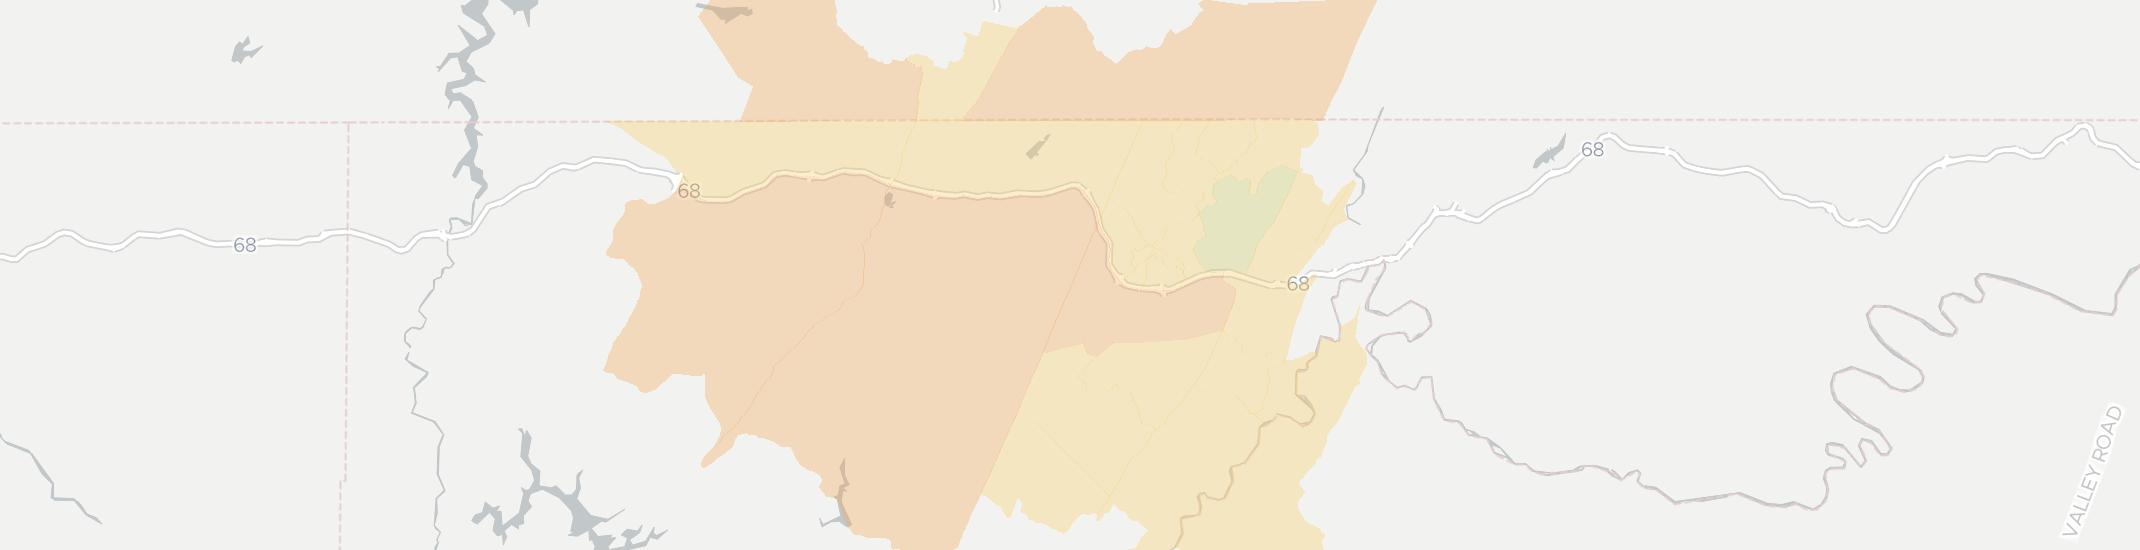 Frostburg Internet Competition Map. Click for interactive map.